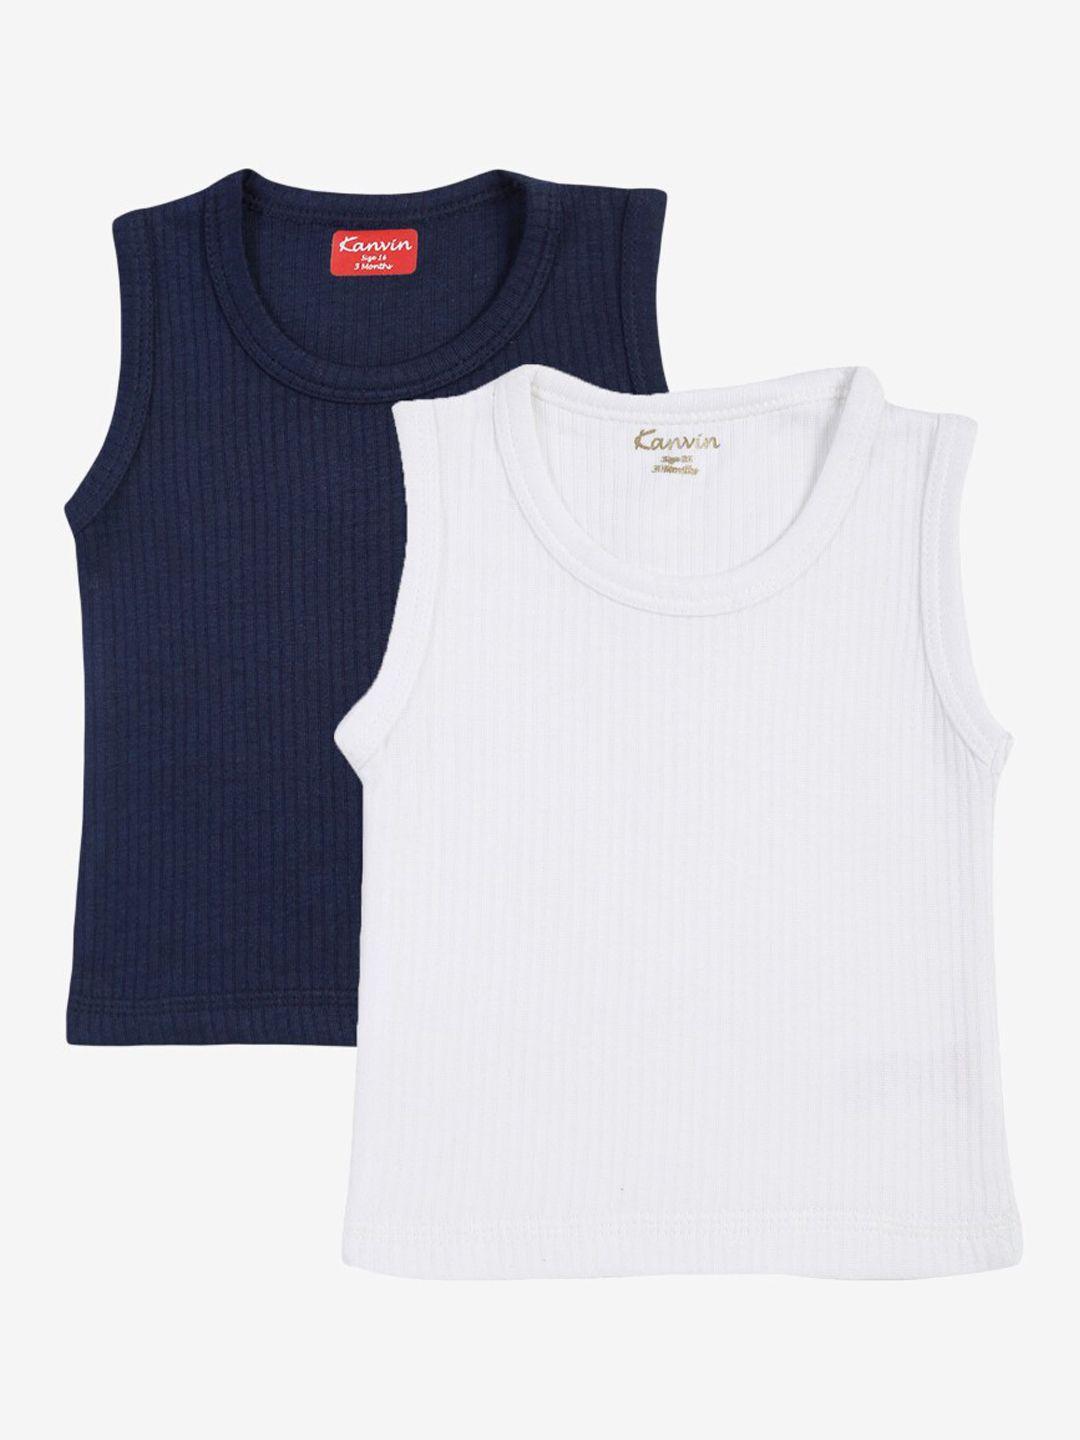 kanvin boys pack of 2 navy blue and white cotton ribbed thermal tops